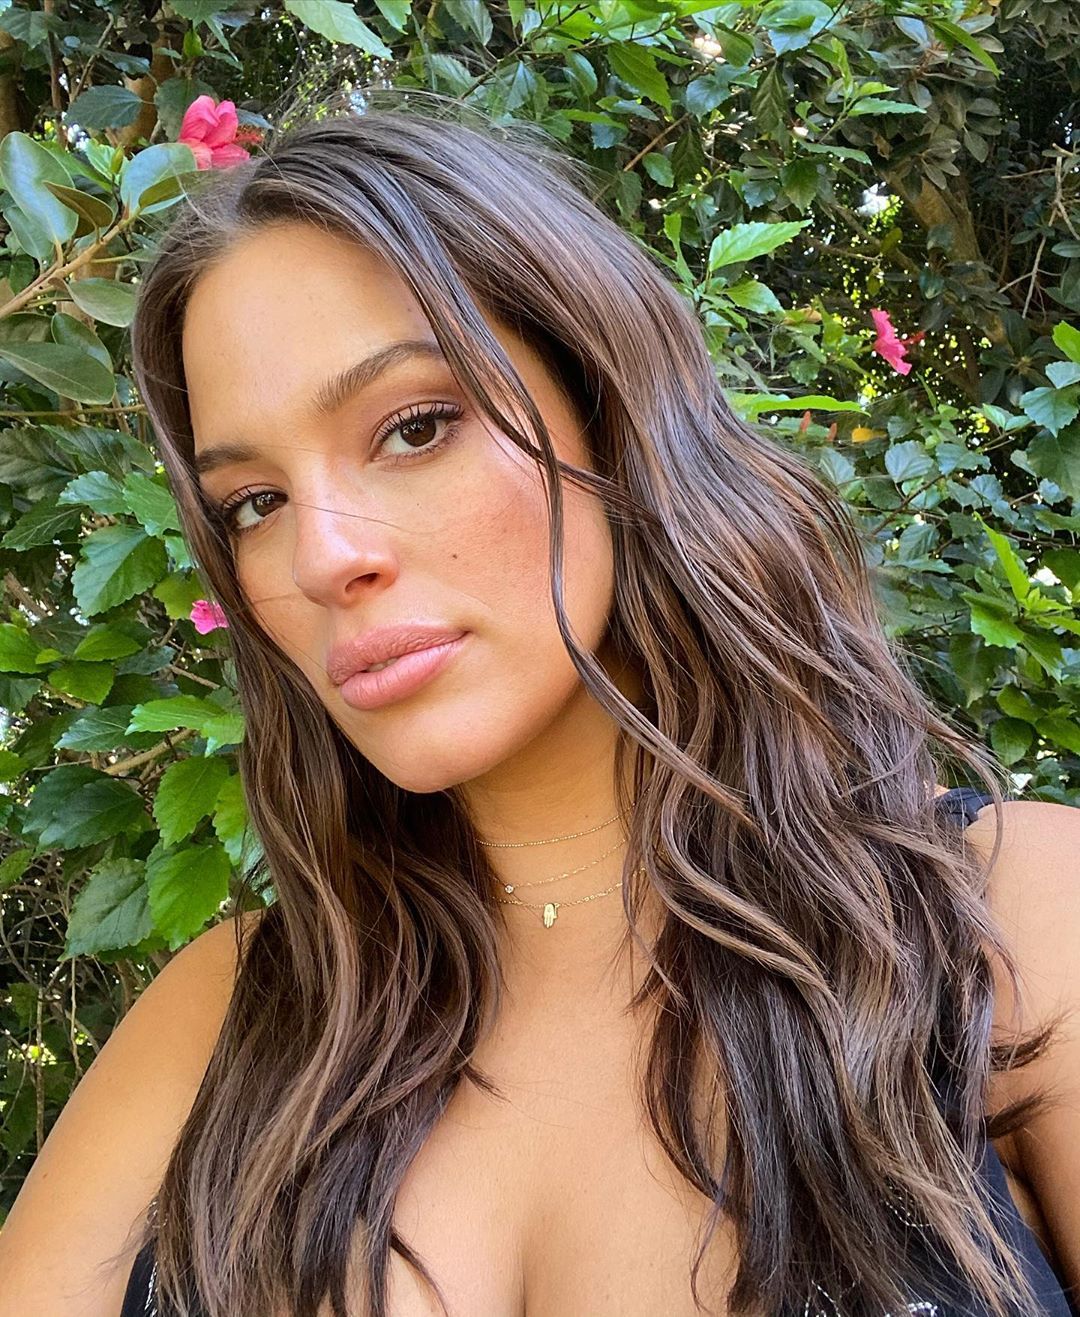 Pregnant Girls Gone Wild Nude - Ashley Graham just posted a very pregnant naked selfie